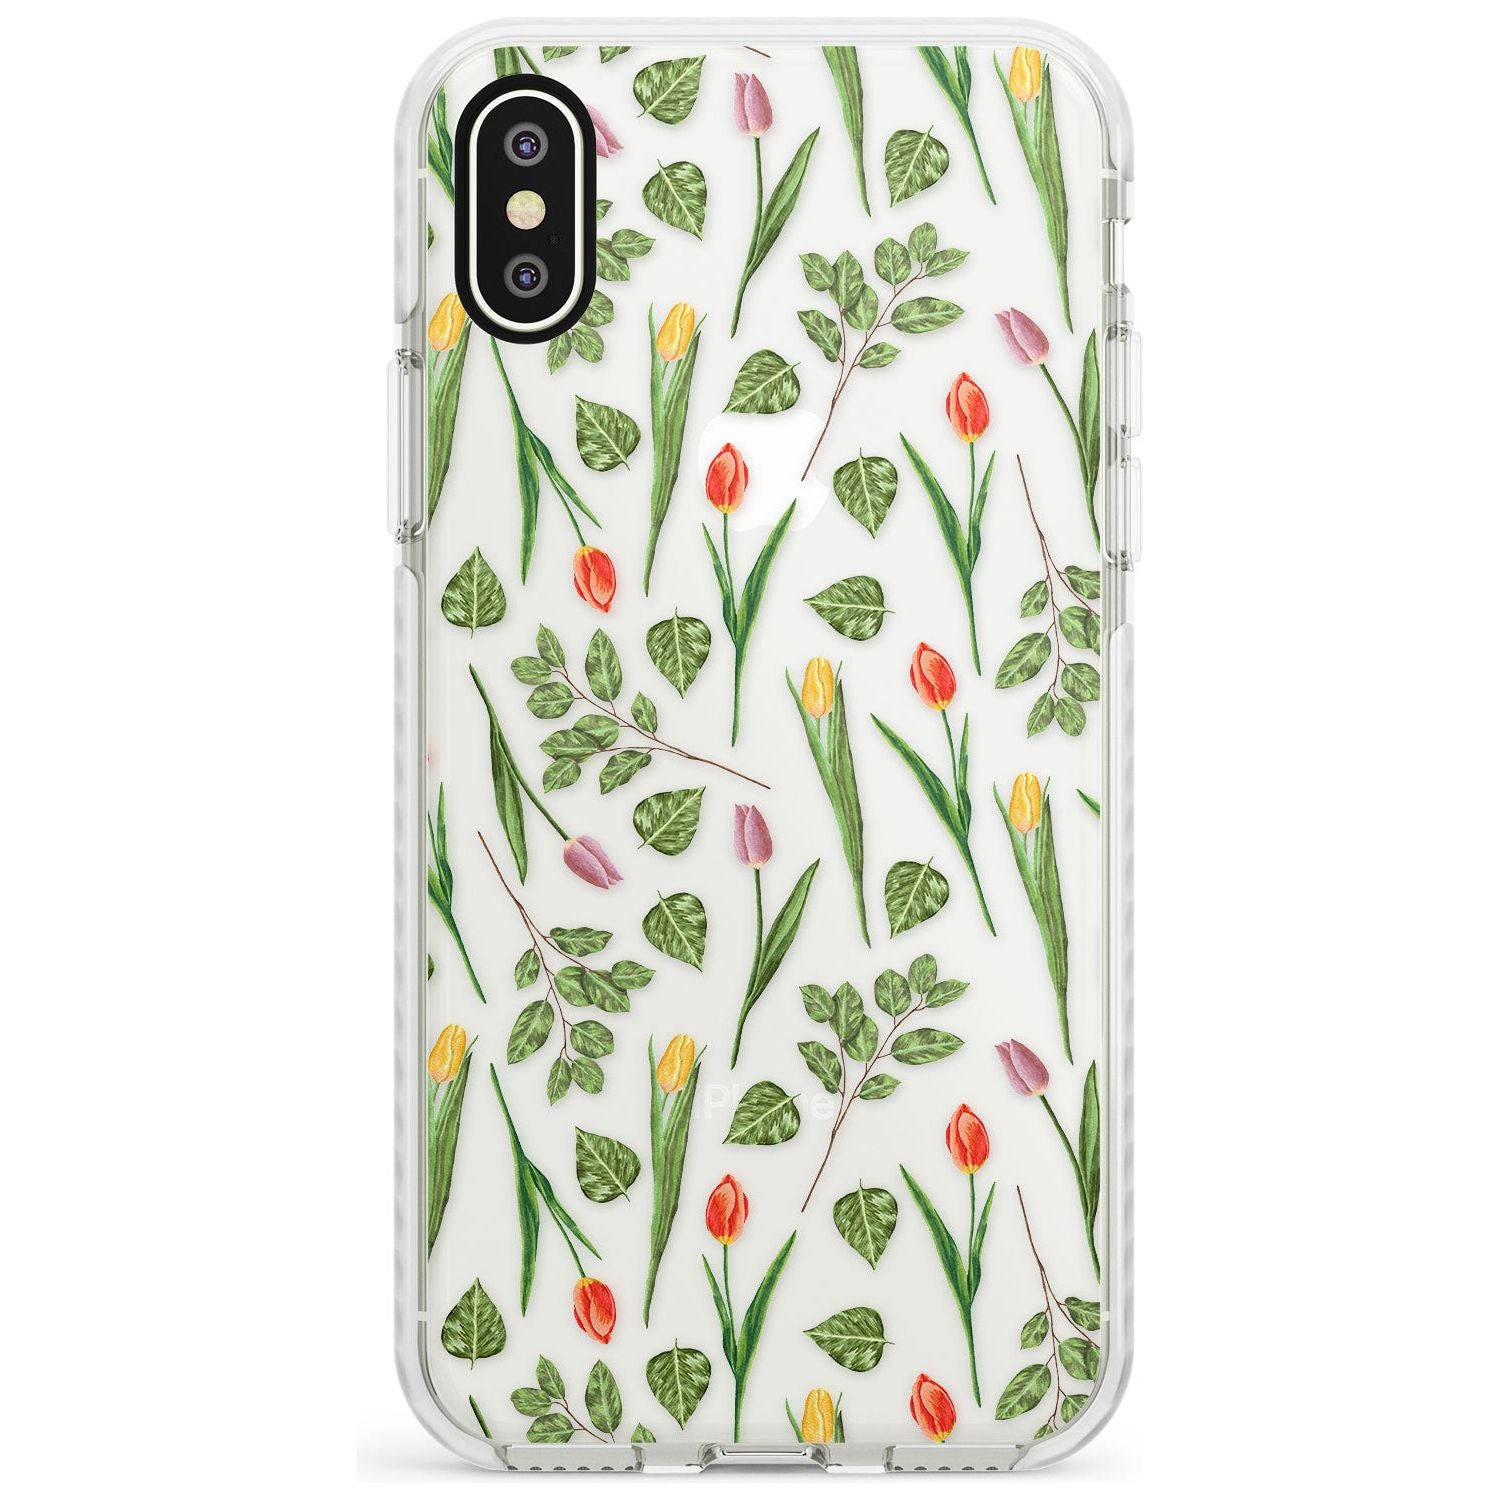 Spring Tulips Transparent Floral Impact Phone Case for iPhone X XS Max XR